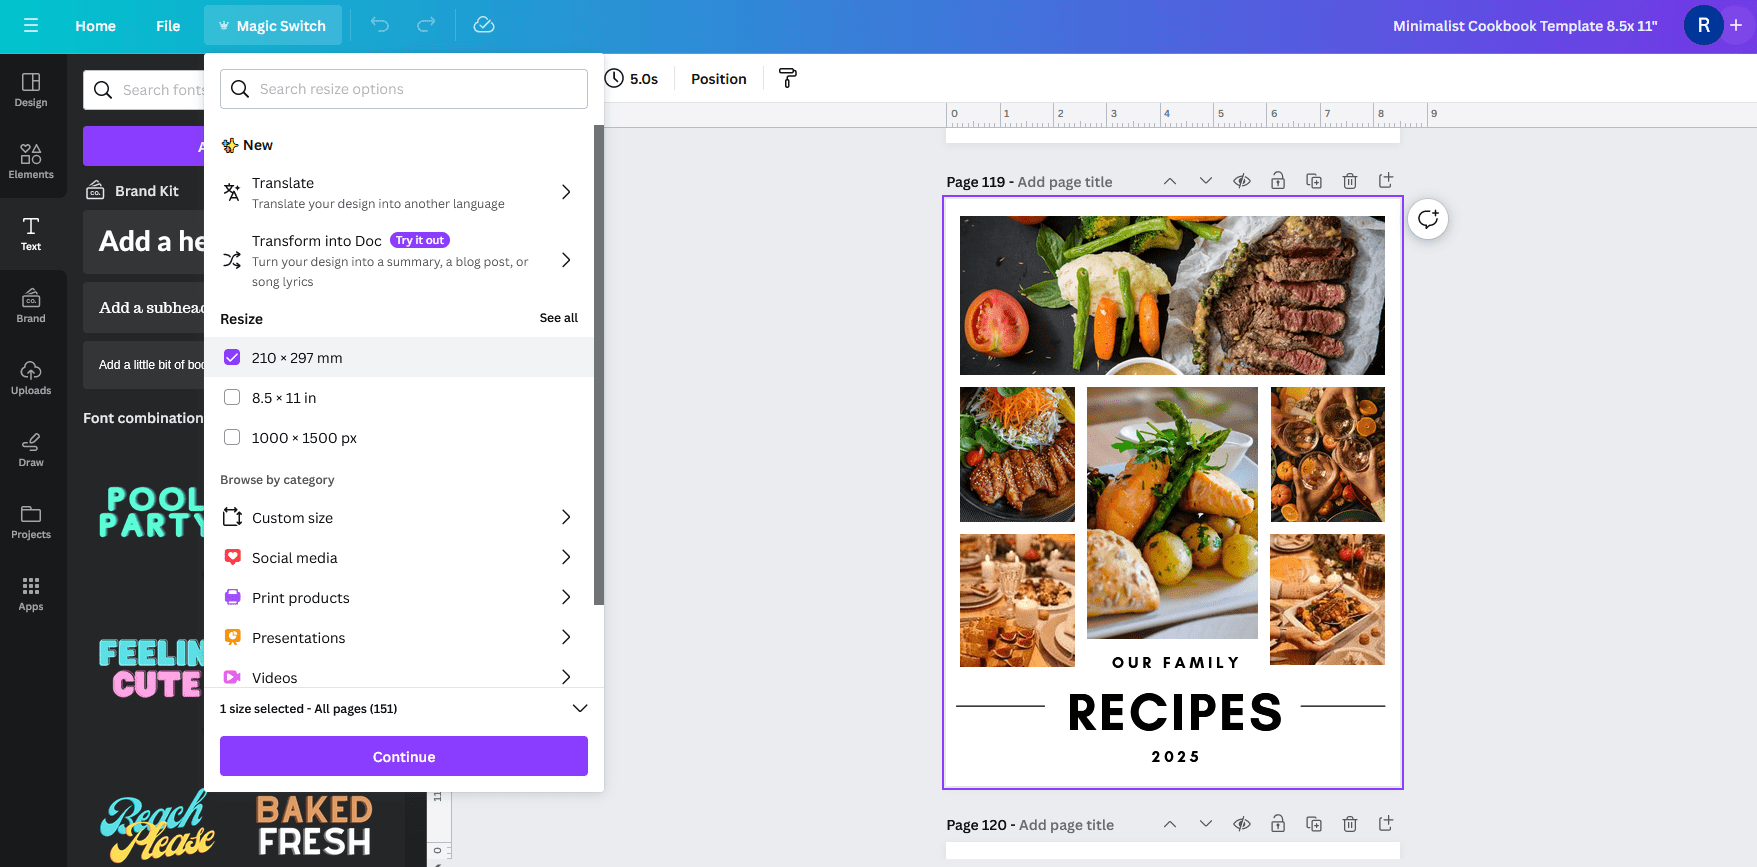 how to resize in canva magic resize tool canva tutorial diy cookbook recipe card template all about planners-min(1)